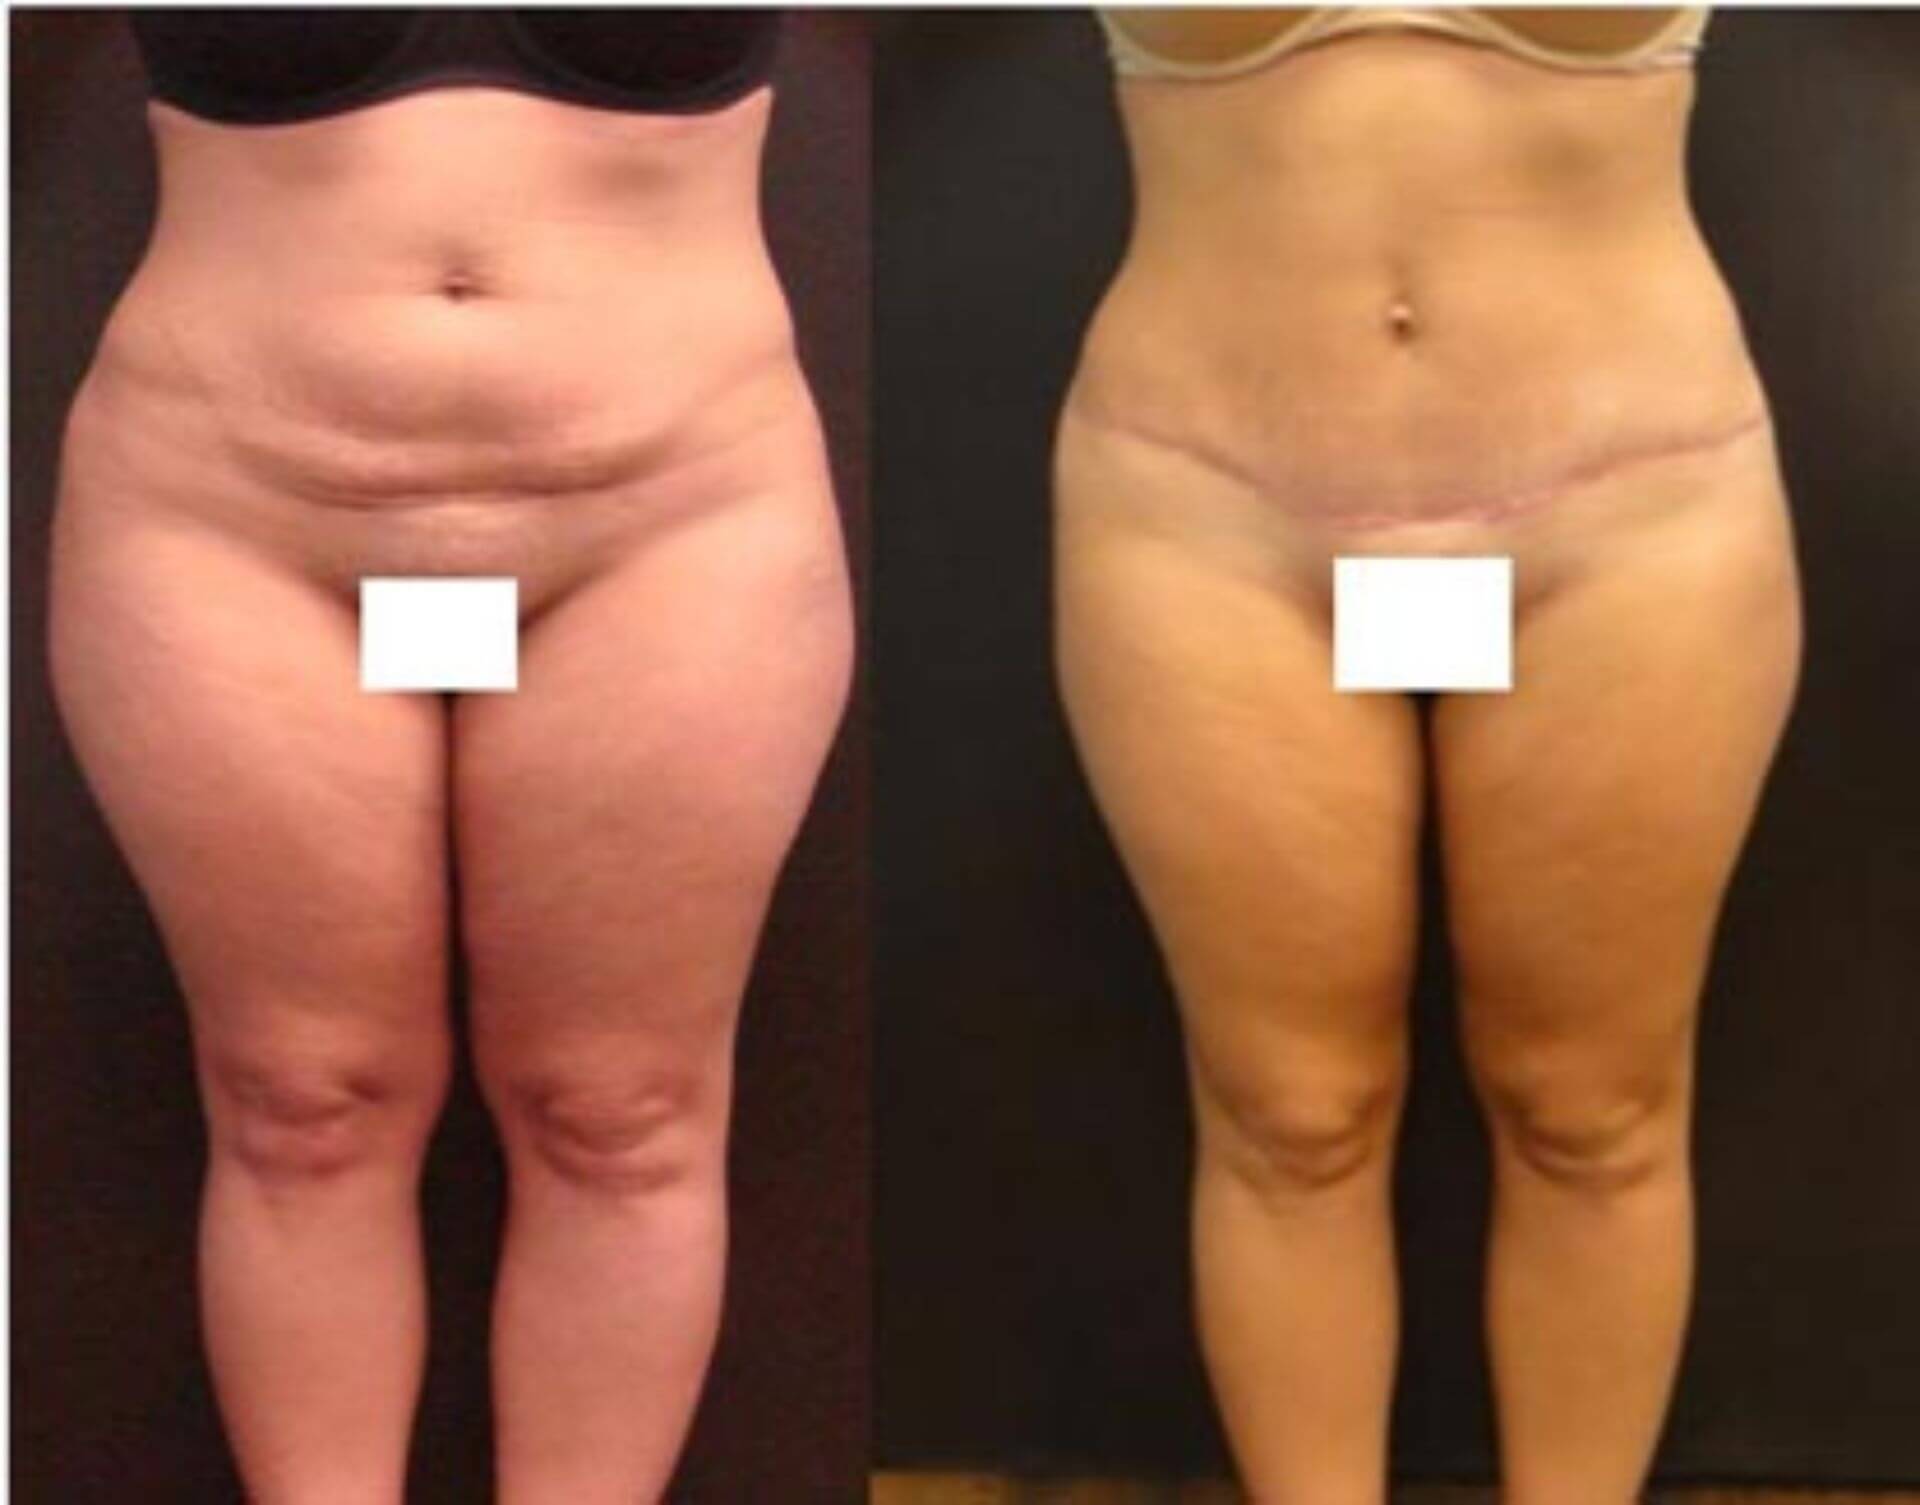 dr-penelope-treece-metairie-plastic-surgeon-before-after-abdominoplasty-1